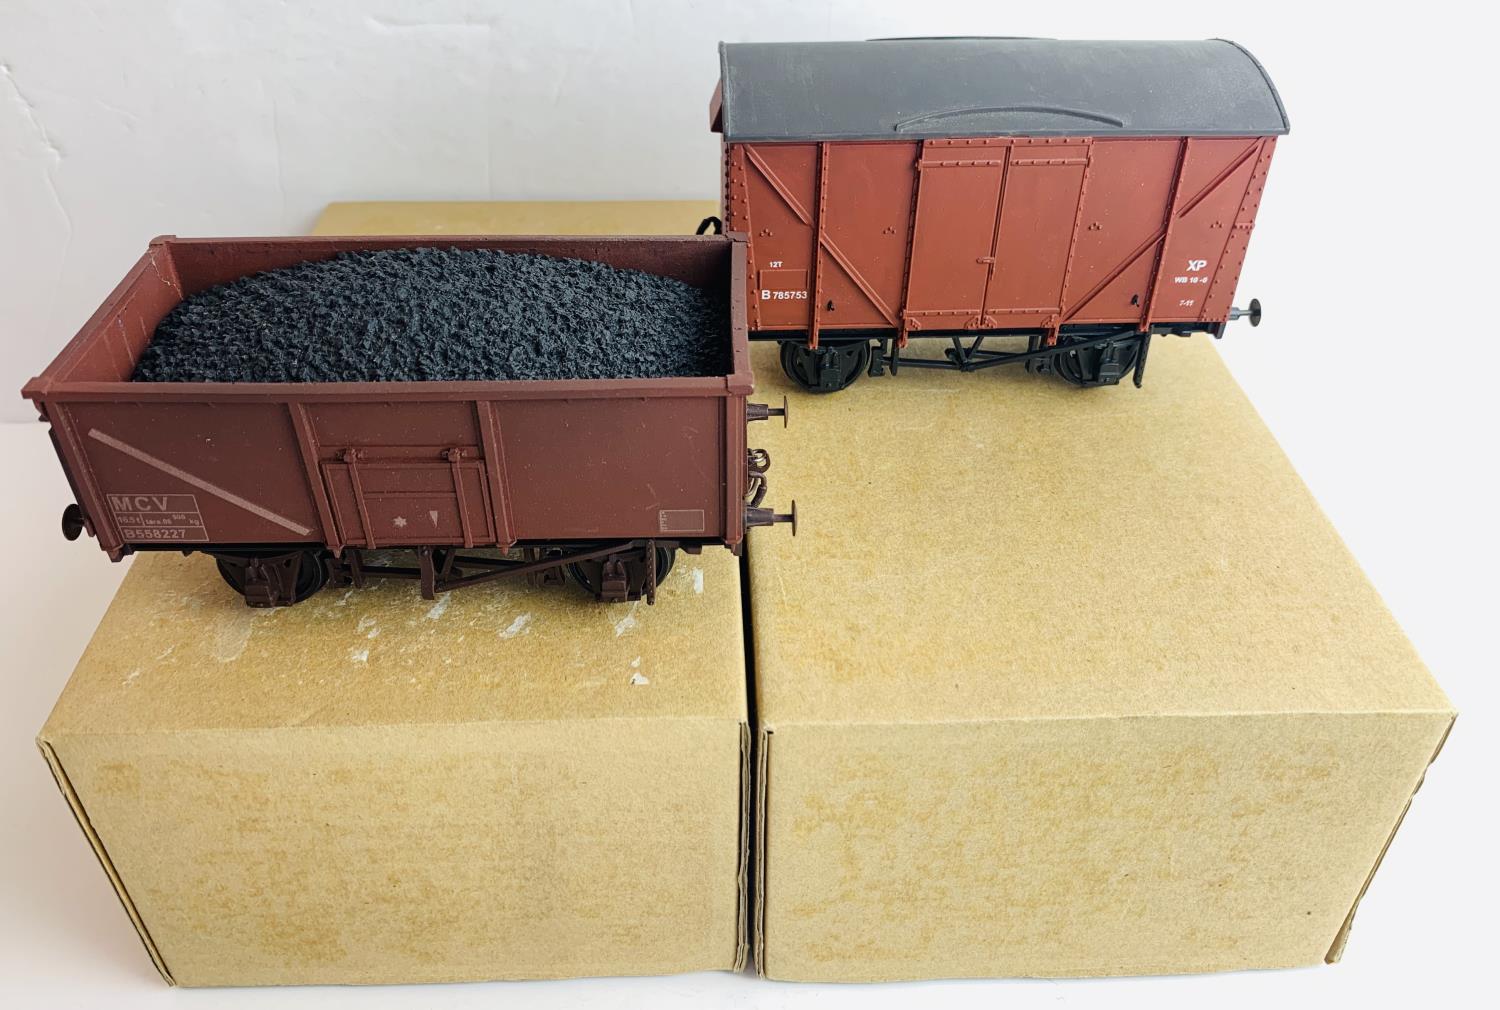 2x Skytrex Models 7mm O Gauge BR Wagons - Both Boxed. P&P Group 2 (£18+VAT for the first lot and £